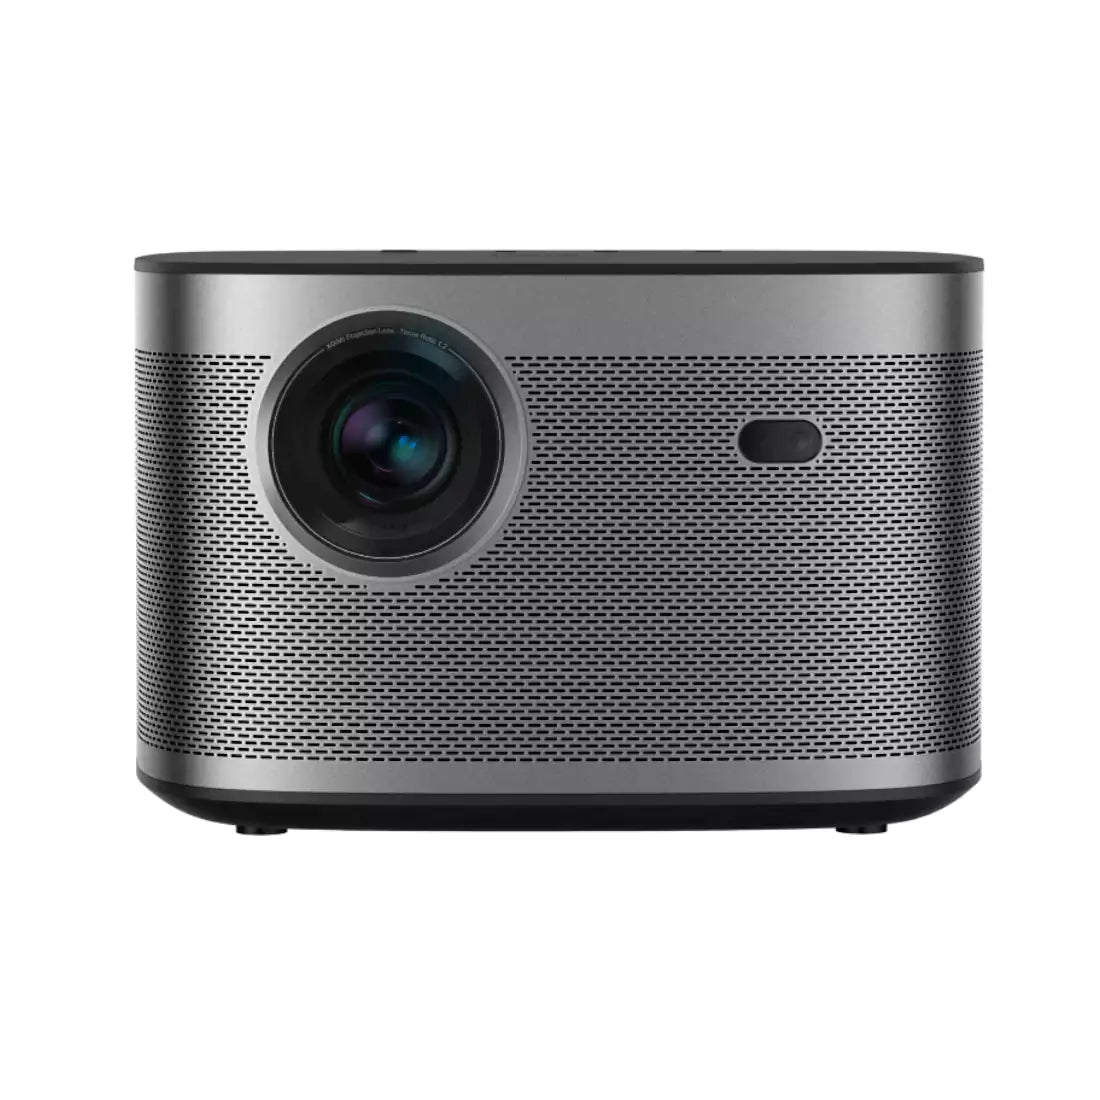 XGIMI Horizon 1080P Full HD Projector - Front View